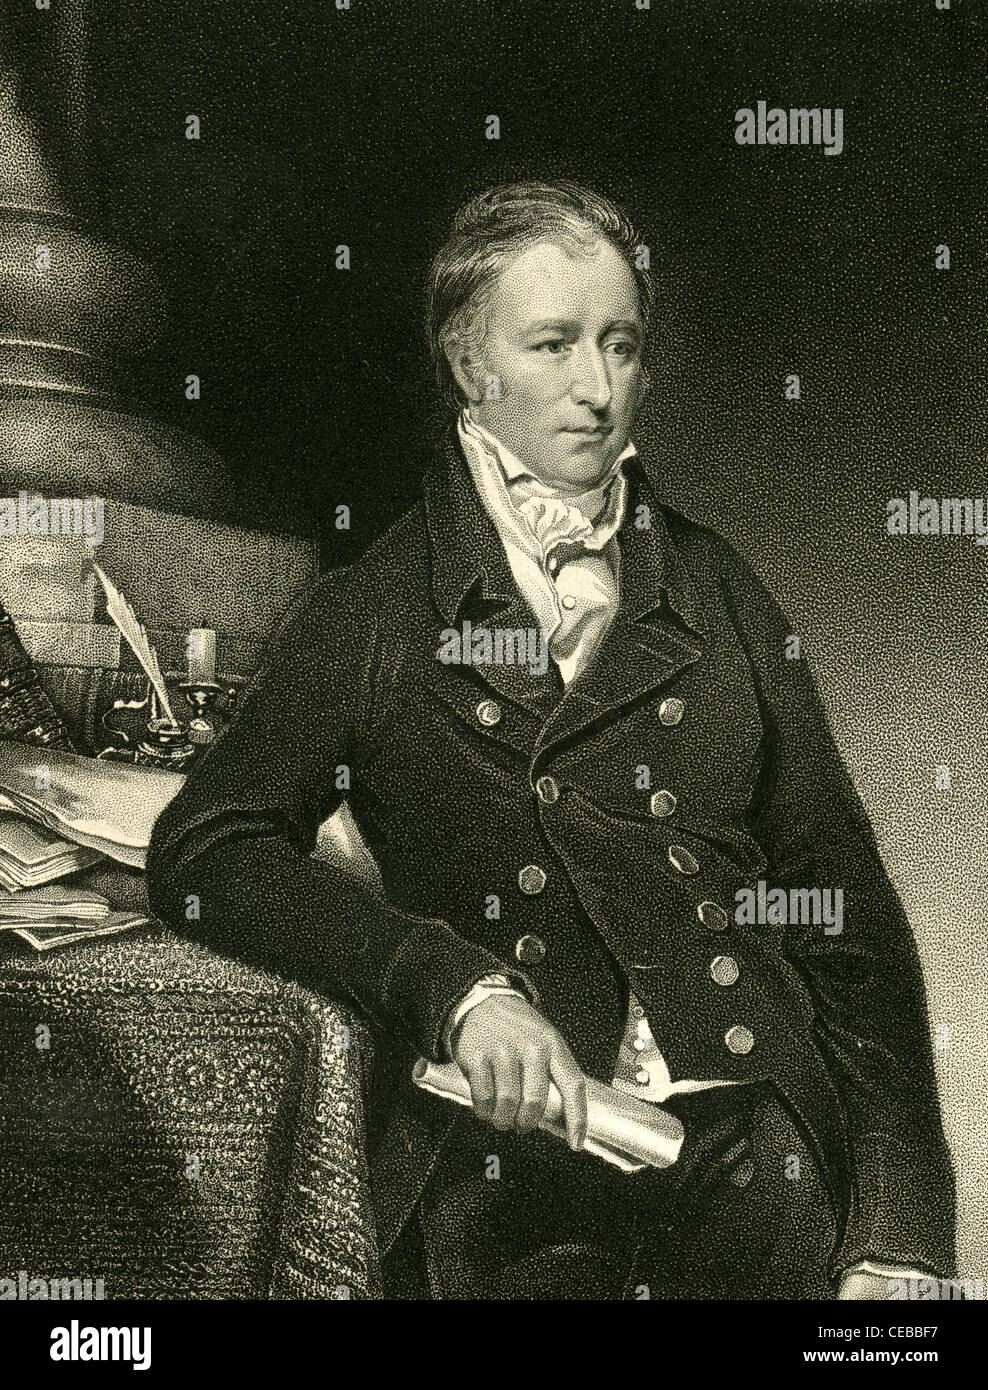 1830 engraving of Henry Lascelles, 2nd Earl of Harewood. Stock Photo